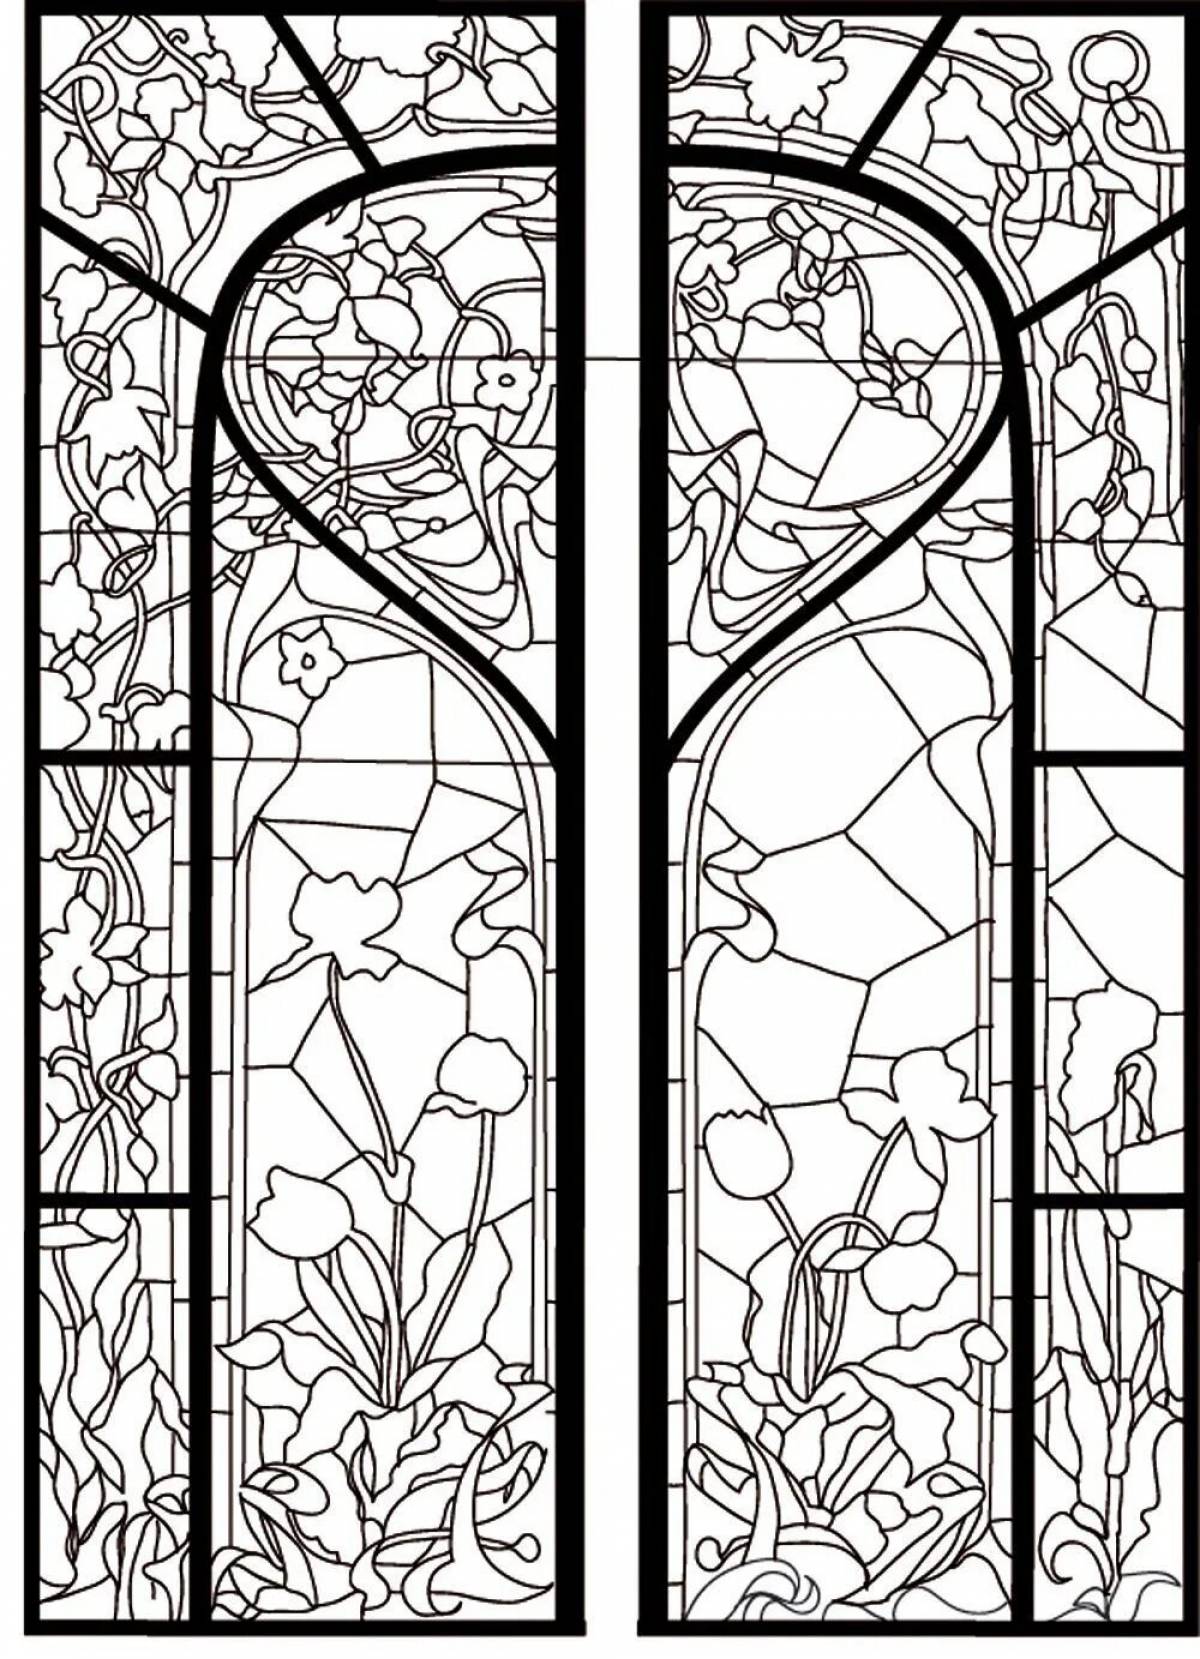 Stained glass windows #7